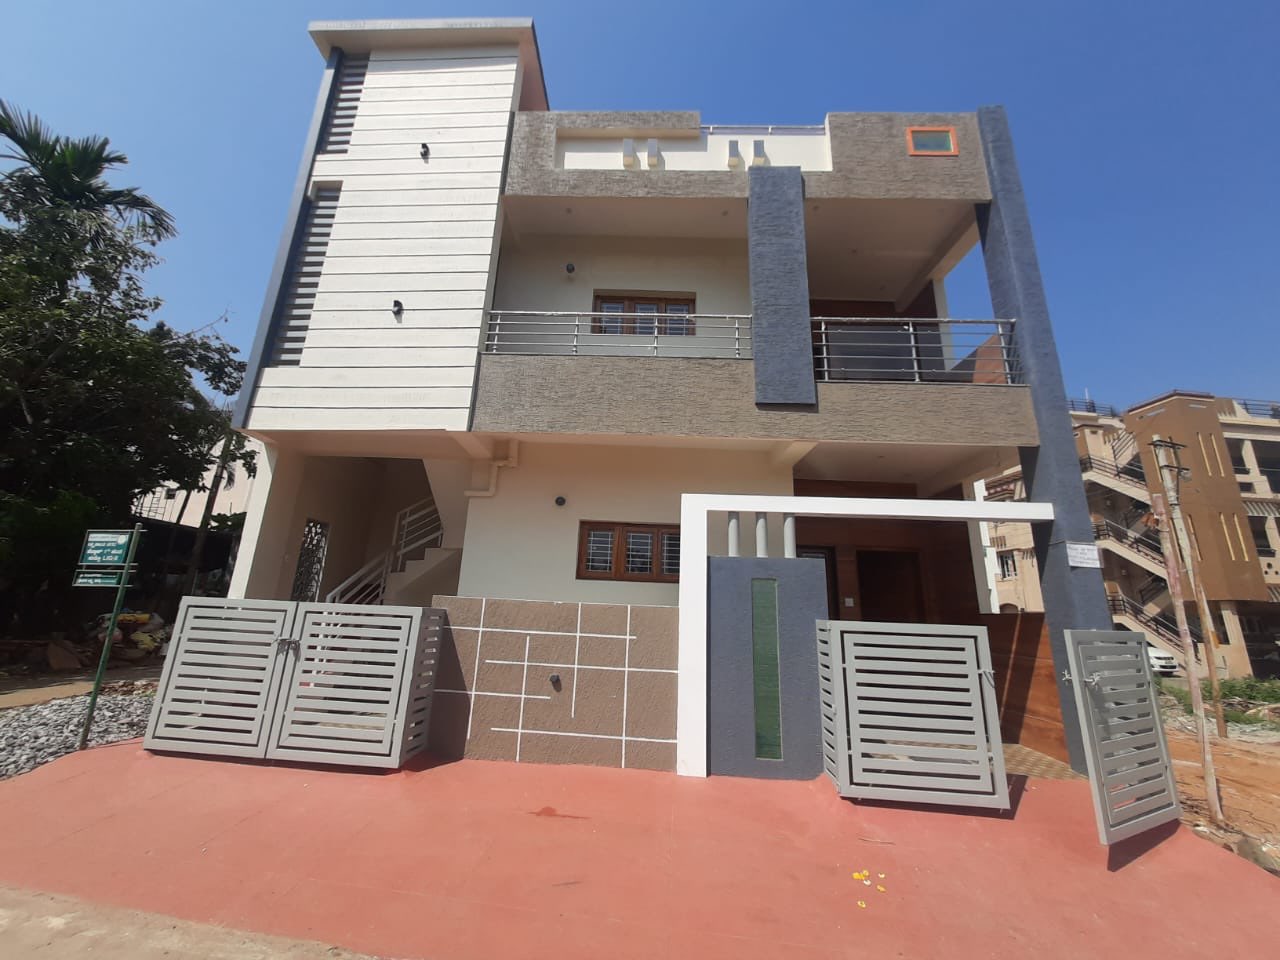 2 Bed/ 2 Bath Rent Apartment/ Flat; 900 sq. ft. carpet area, Furnished for rent @Behind Leo janani apartment Hebbal 2nd stage Mysore 